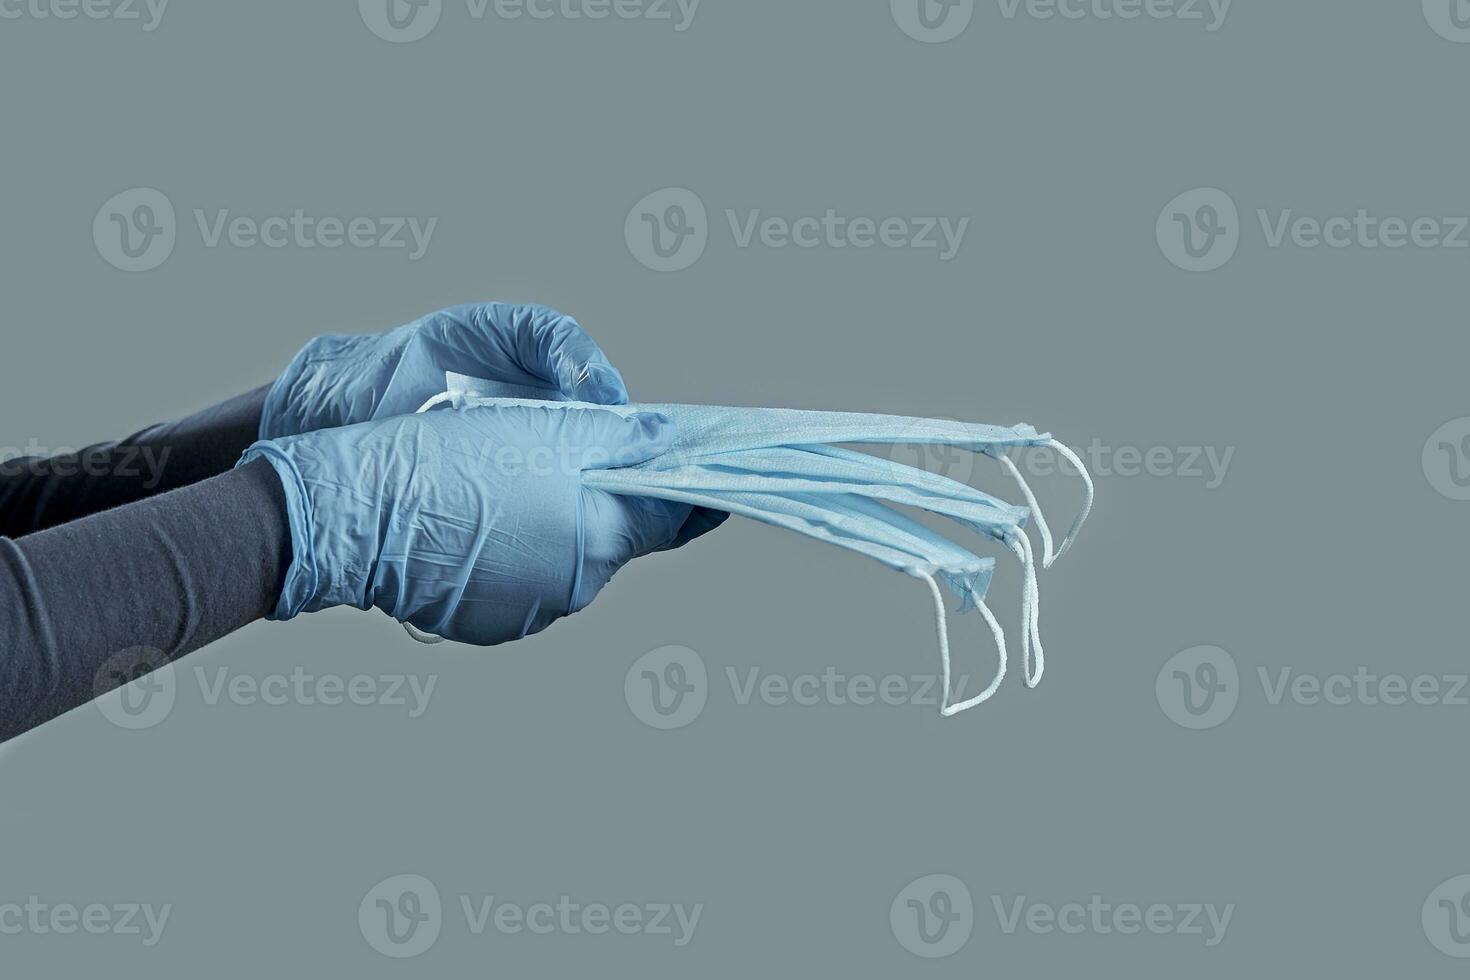 Hands in disposable gloves holding medical mask on a gray background. Photo with copy space.